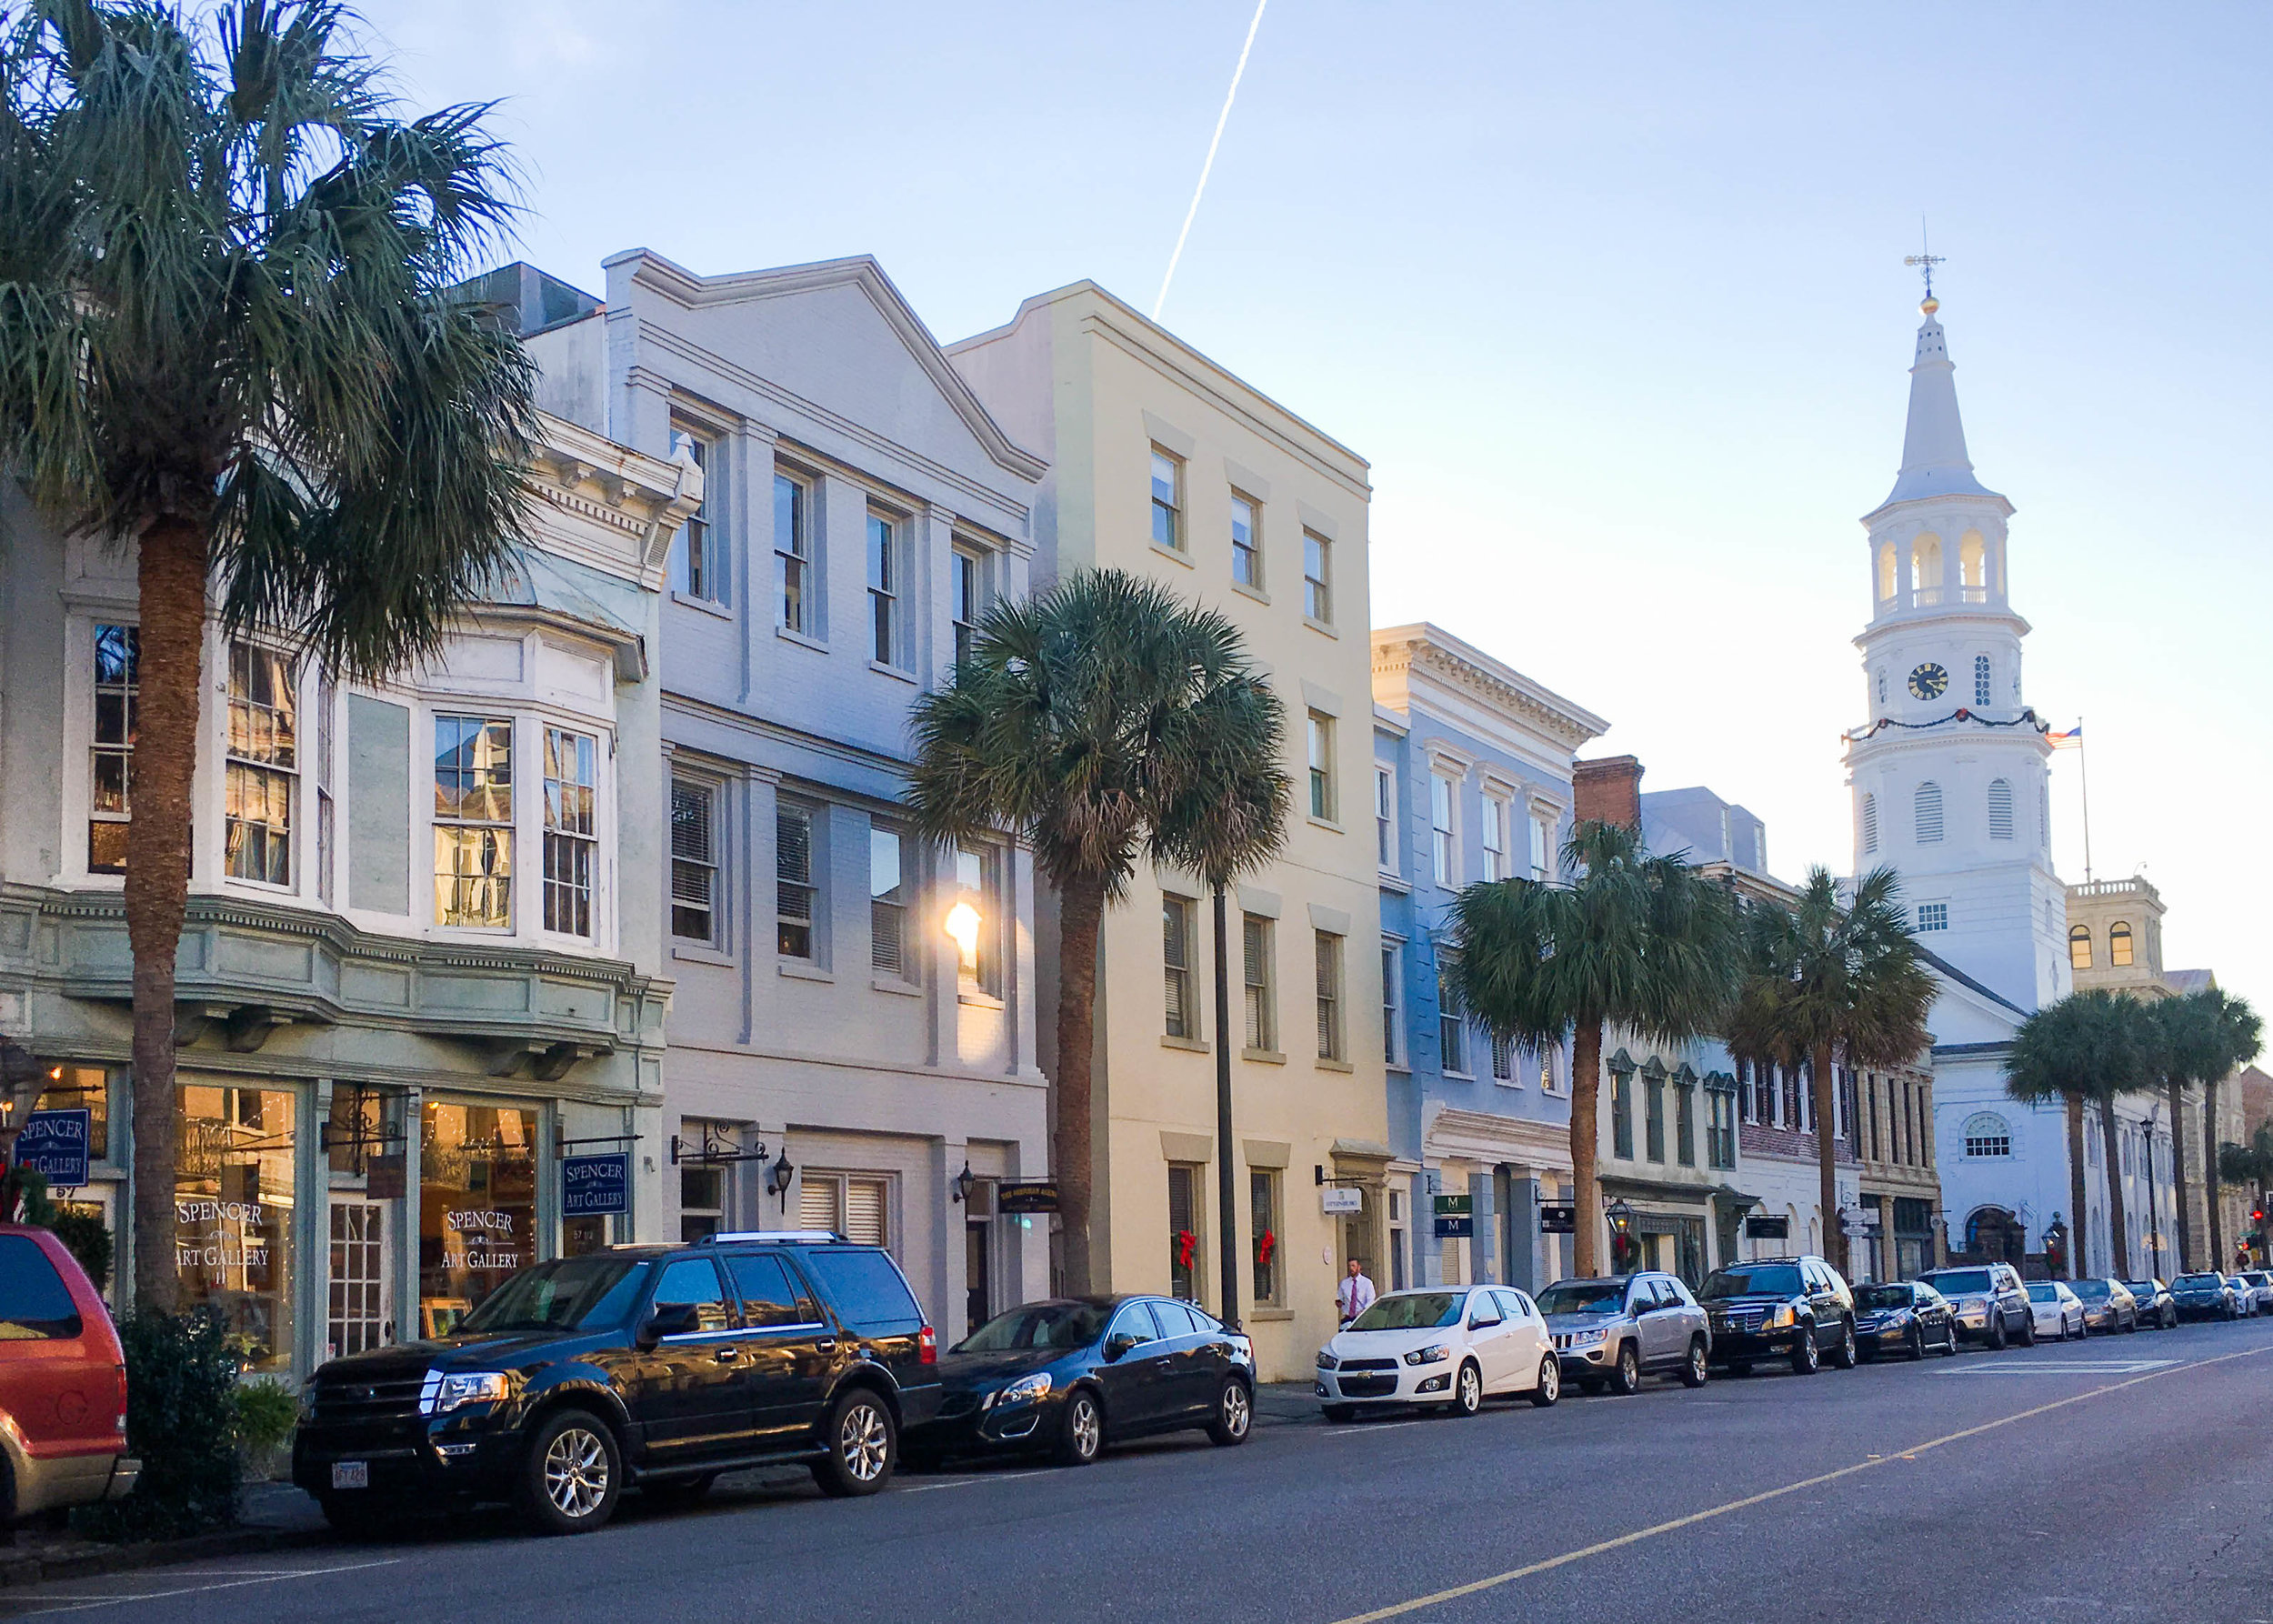 self guided driving tour of charleston sc